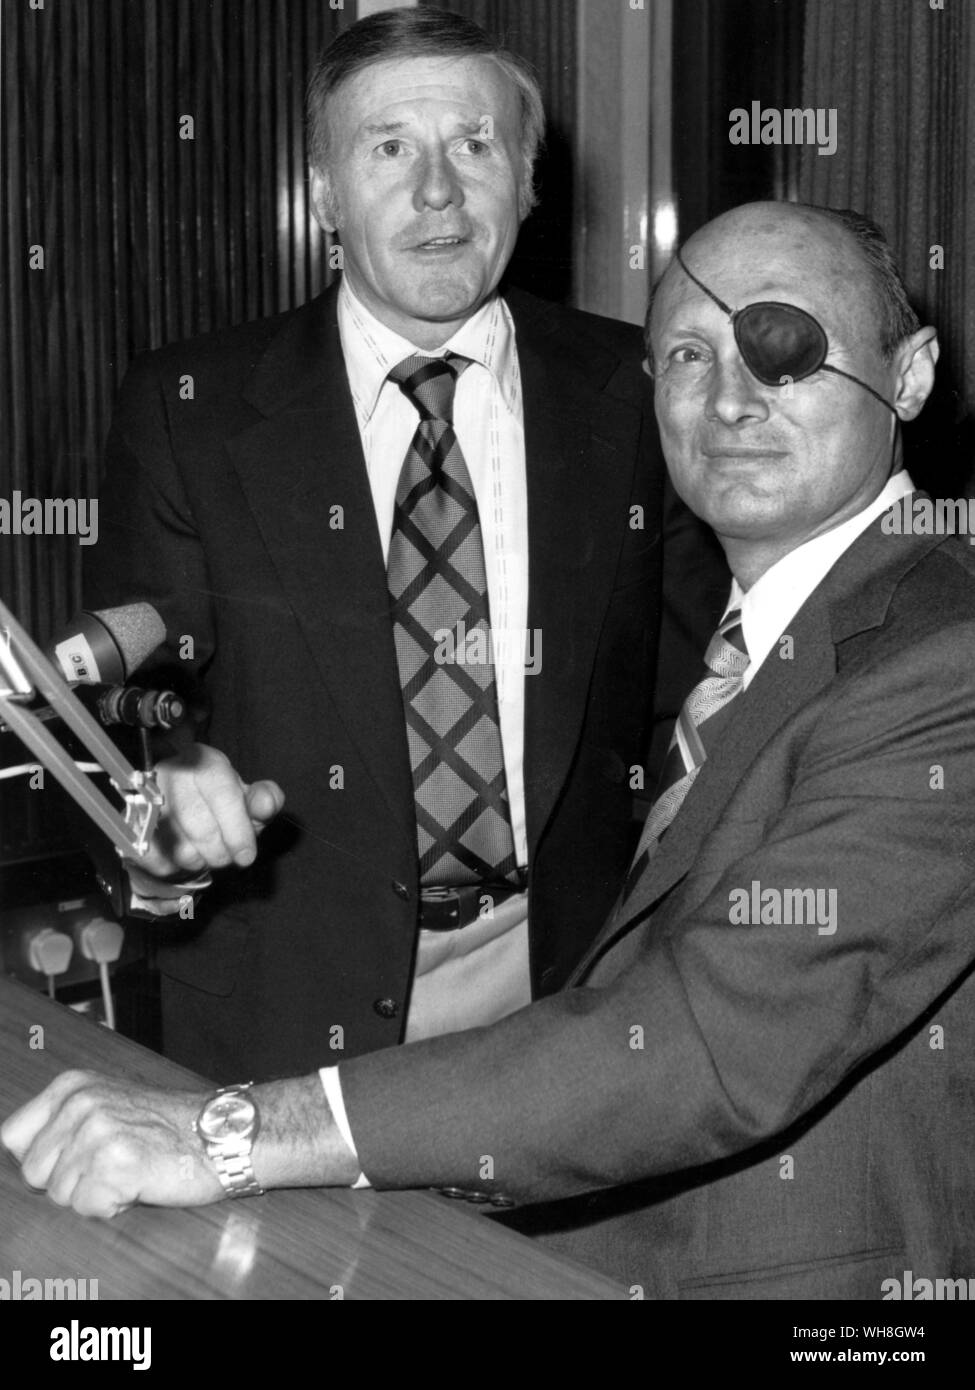 Jimmy Young OBE and Lieutenant General Moshe Dayan (1915 -1981) in 1976, Chief of Staff of the Israel Defence Forces (IDF) during the 1956 Suez campaign. An Israeli military leader and politician, Moshe Dayan was the fourth Chief of Staff of the Israel Defence Forces (1953-1958). Stock Photo